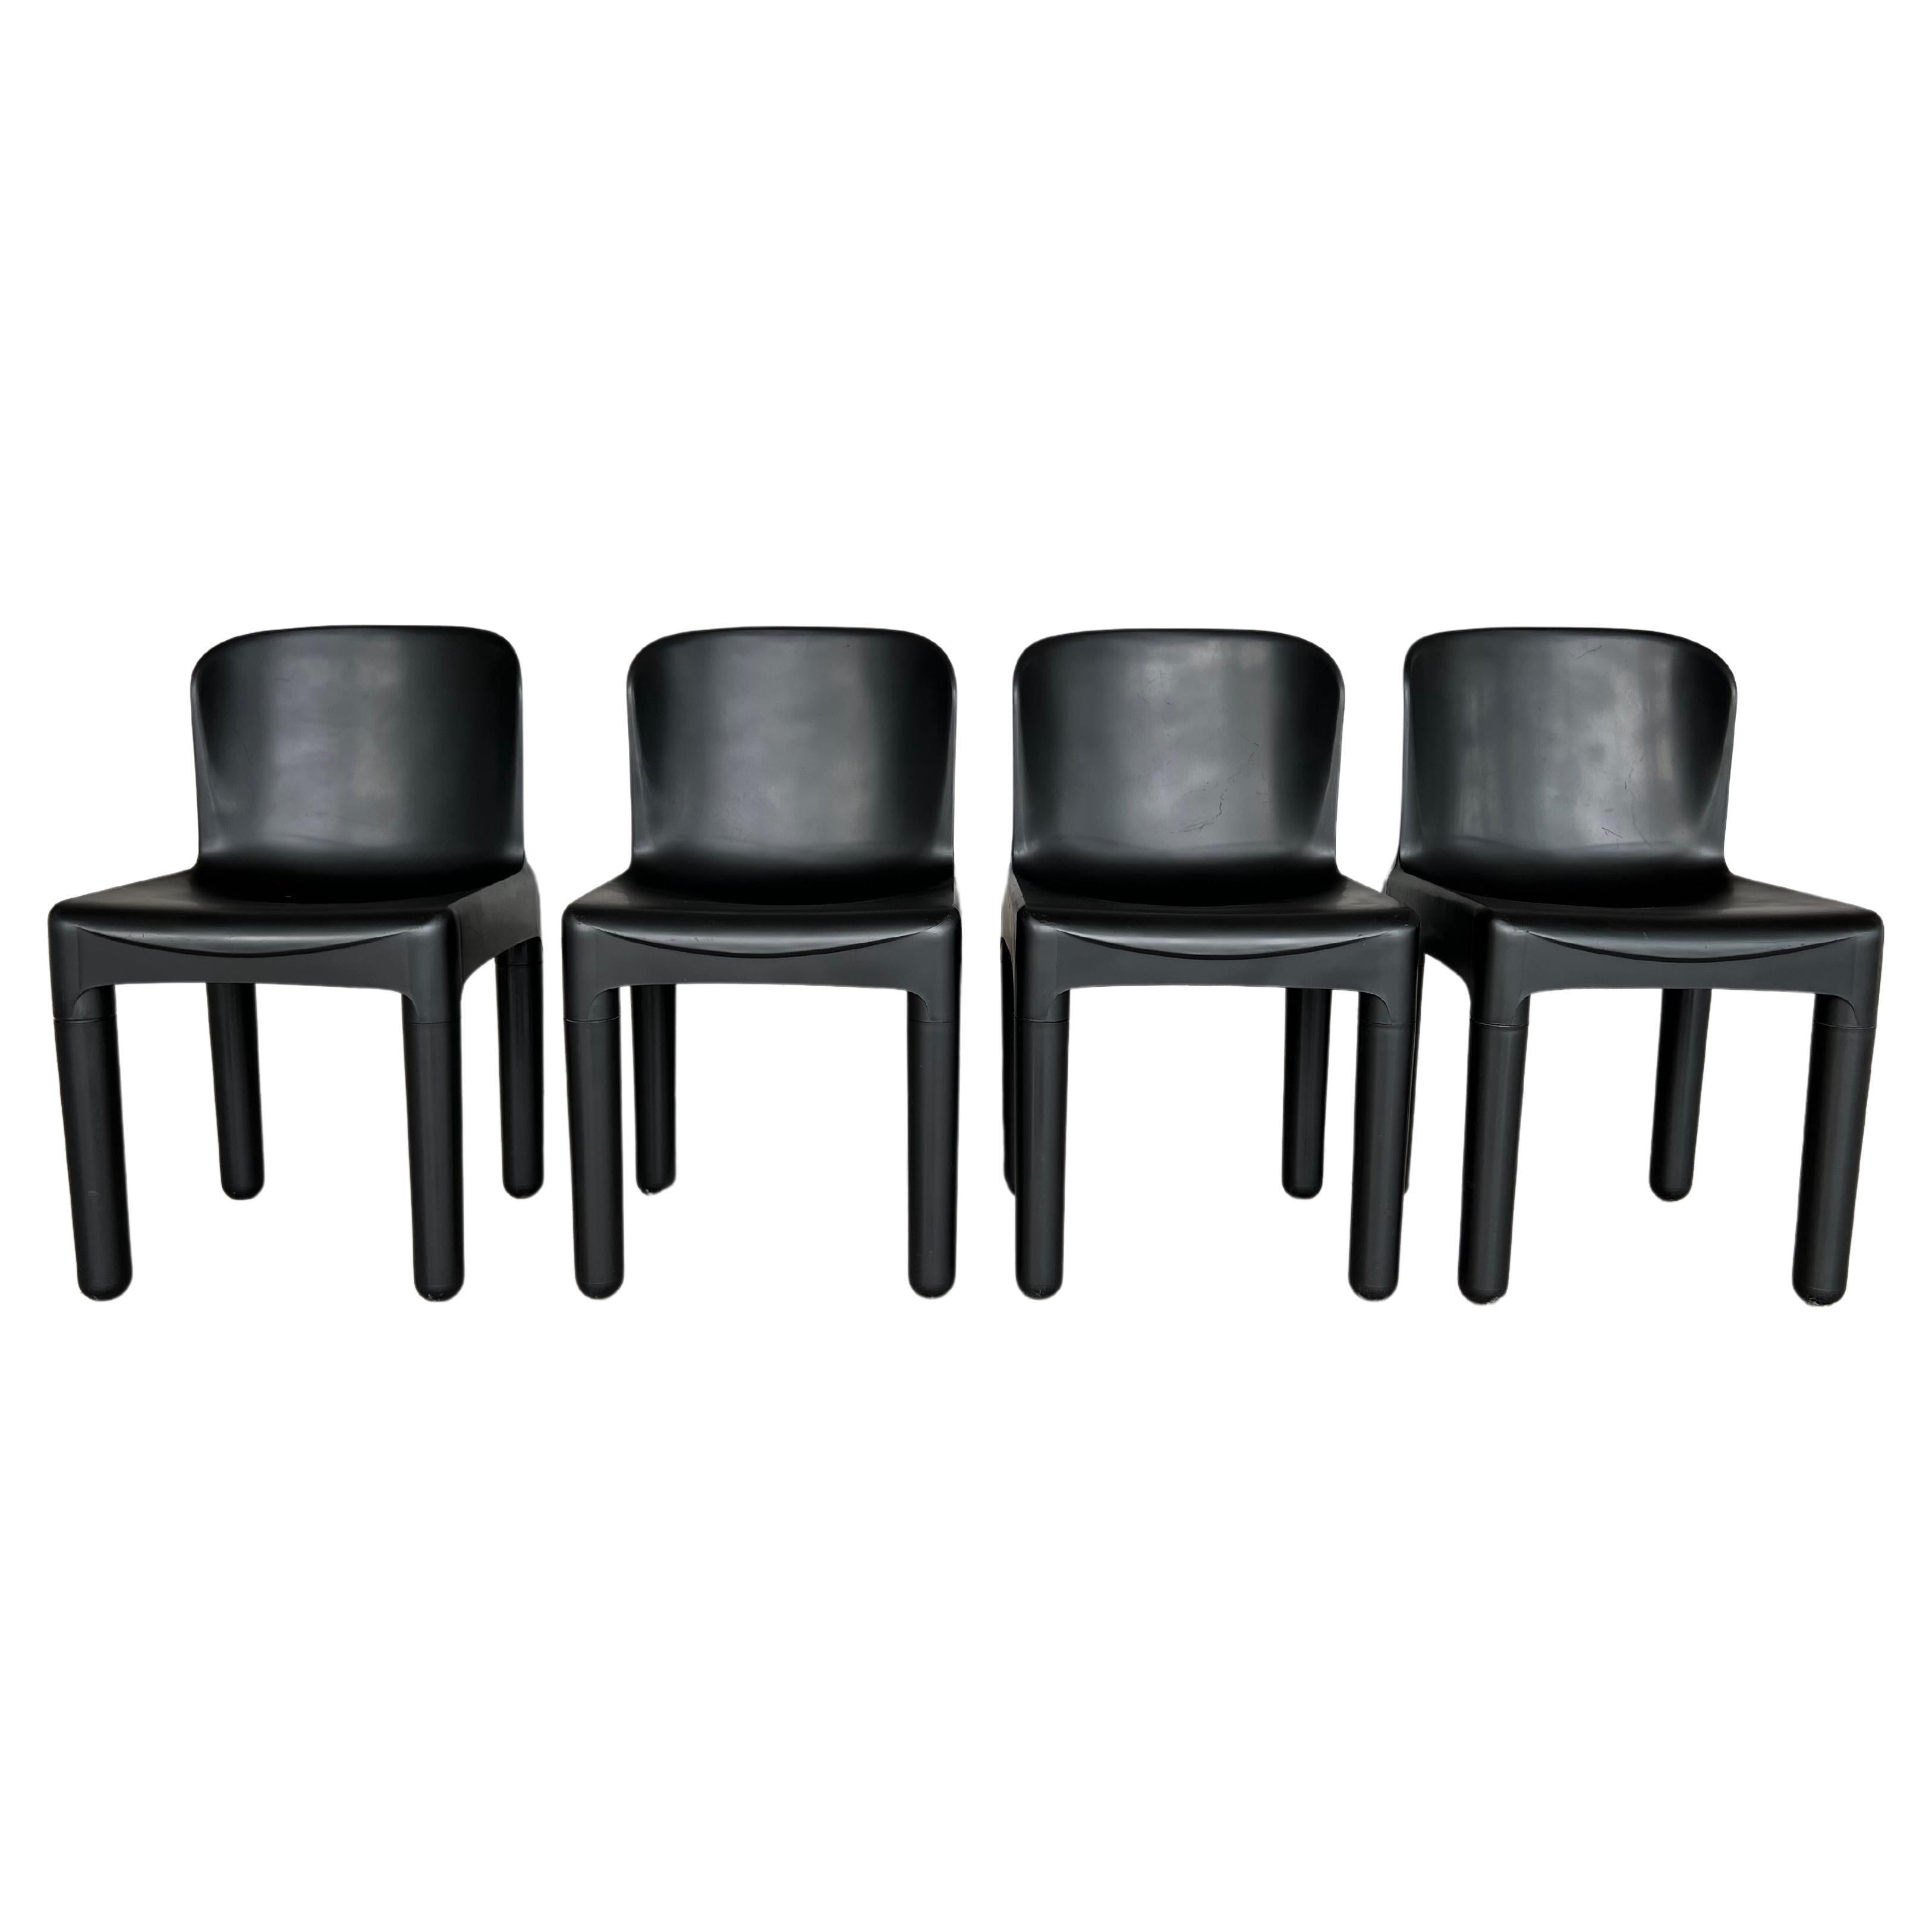 Rare Set of Four Space Age Black Plastic Dining Chairs by Marcello Siard For Sale